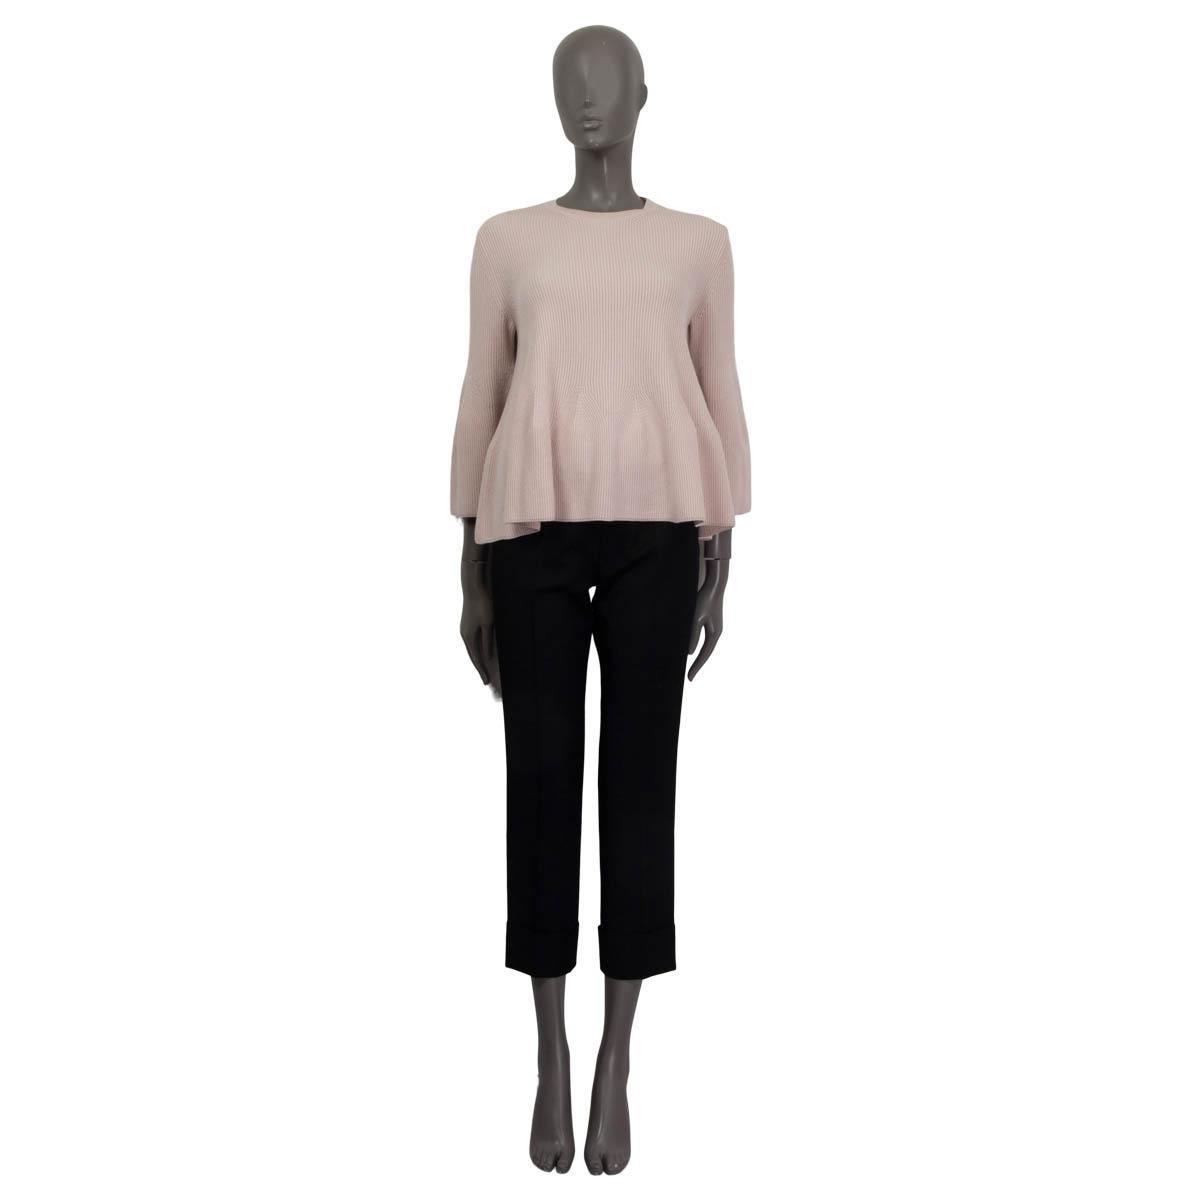 100% authentic Alexander McQueen flared knit sweater in pale rose wool (80%) and cashmere (20%). Features flared sleeves. Unlined. Has been worn and is in excellent condition.

Measurements
Tag Size	S
Size	S
Shoulder Width	39cm (15.2in)
Bust	86cm